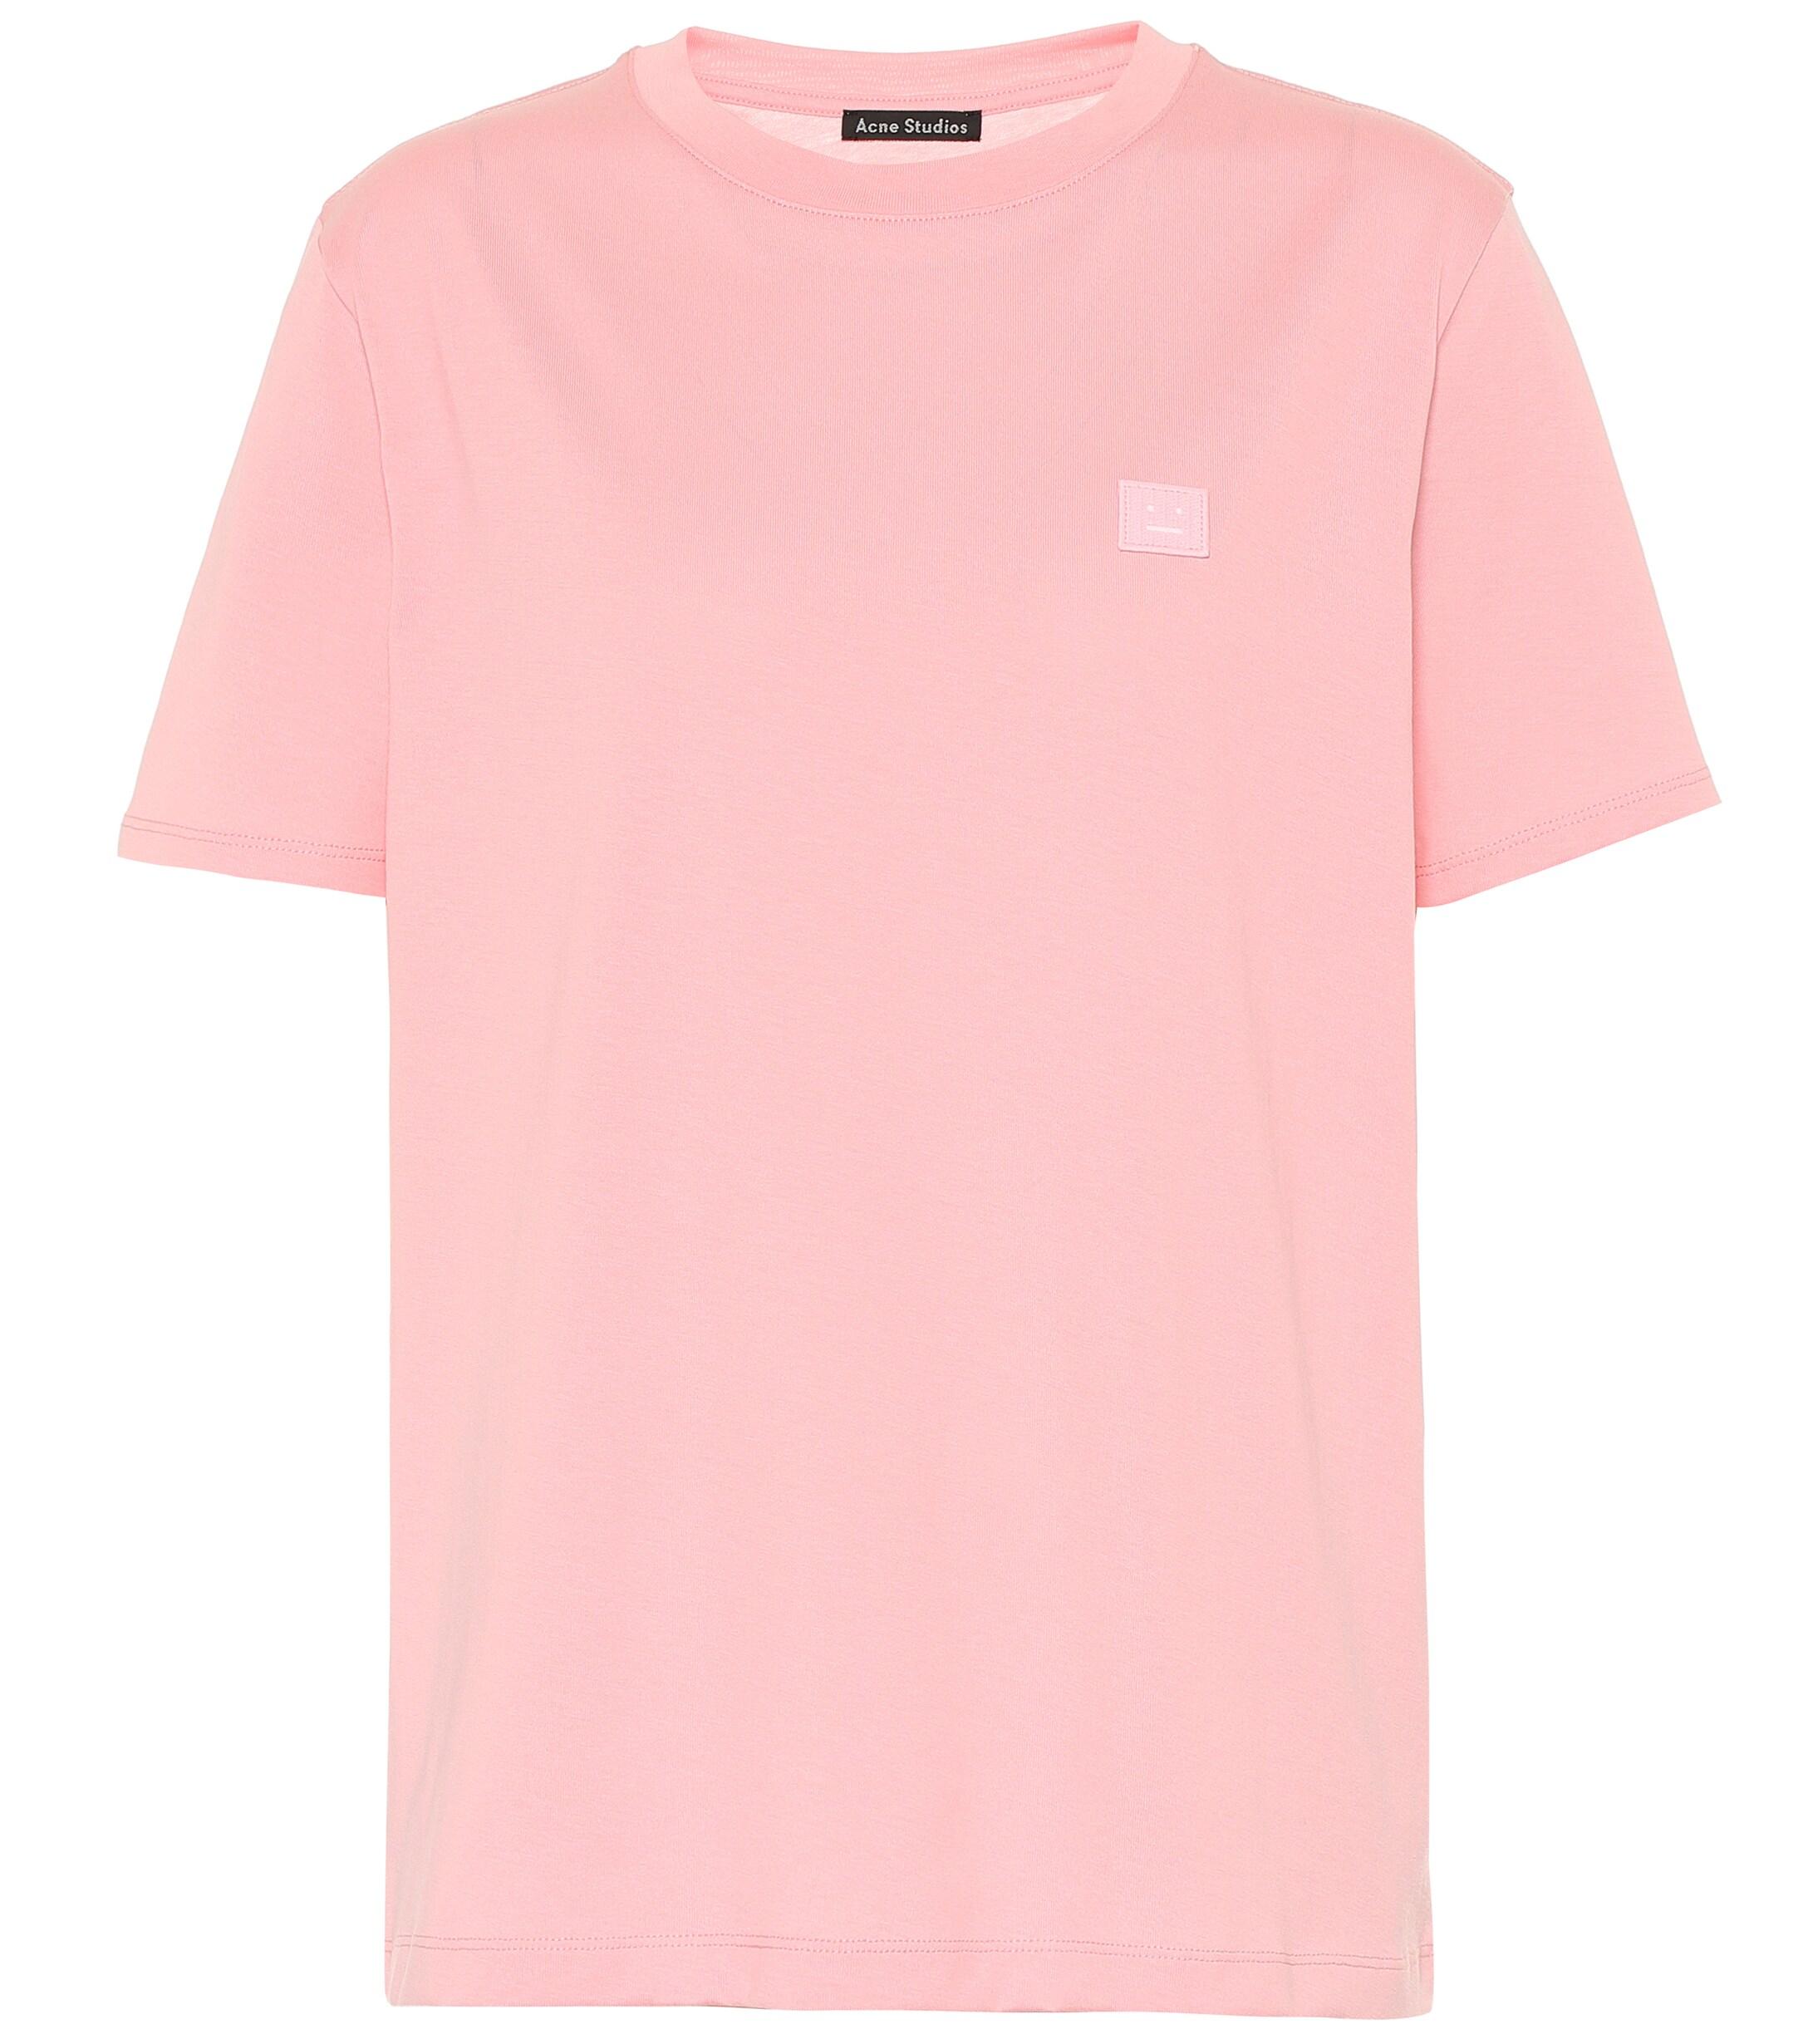 Acne Studios Face Cotton T-shirt in Pink - Lyst